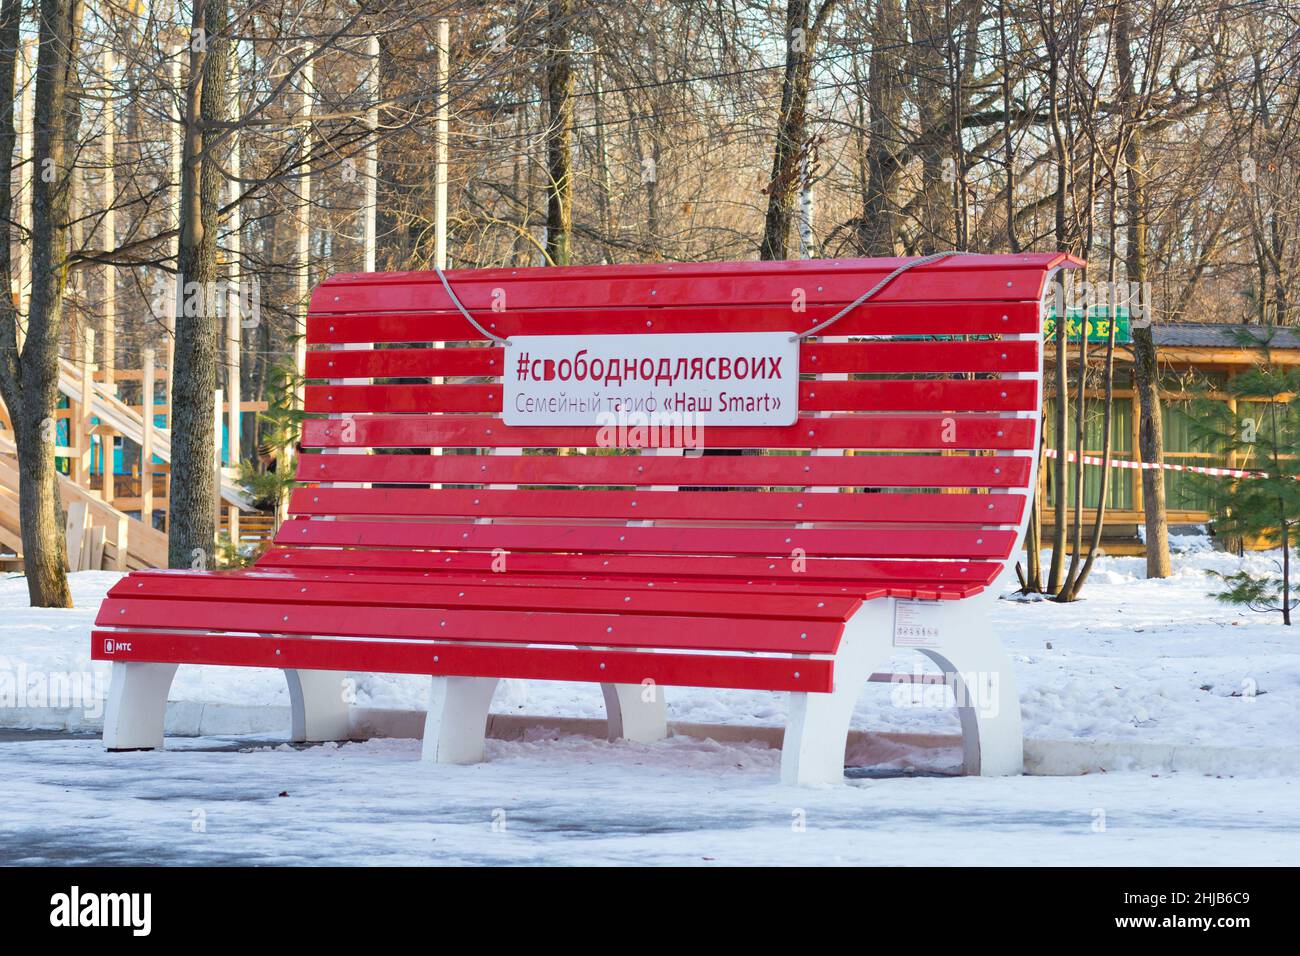 Cheboksary Russia - 12 December 2019: Big red bench in winter park in Lakreevskiy forest. Translation: Free for ours, Family tarif Our Smart, MTC Stock Photo